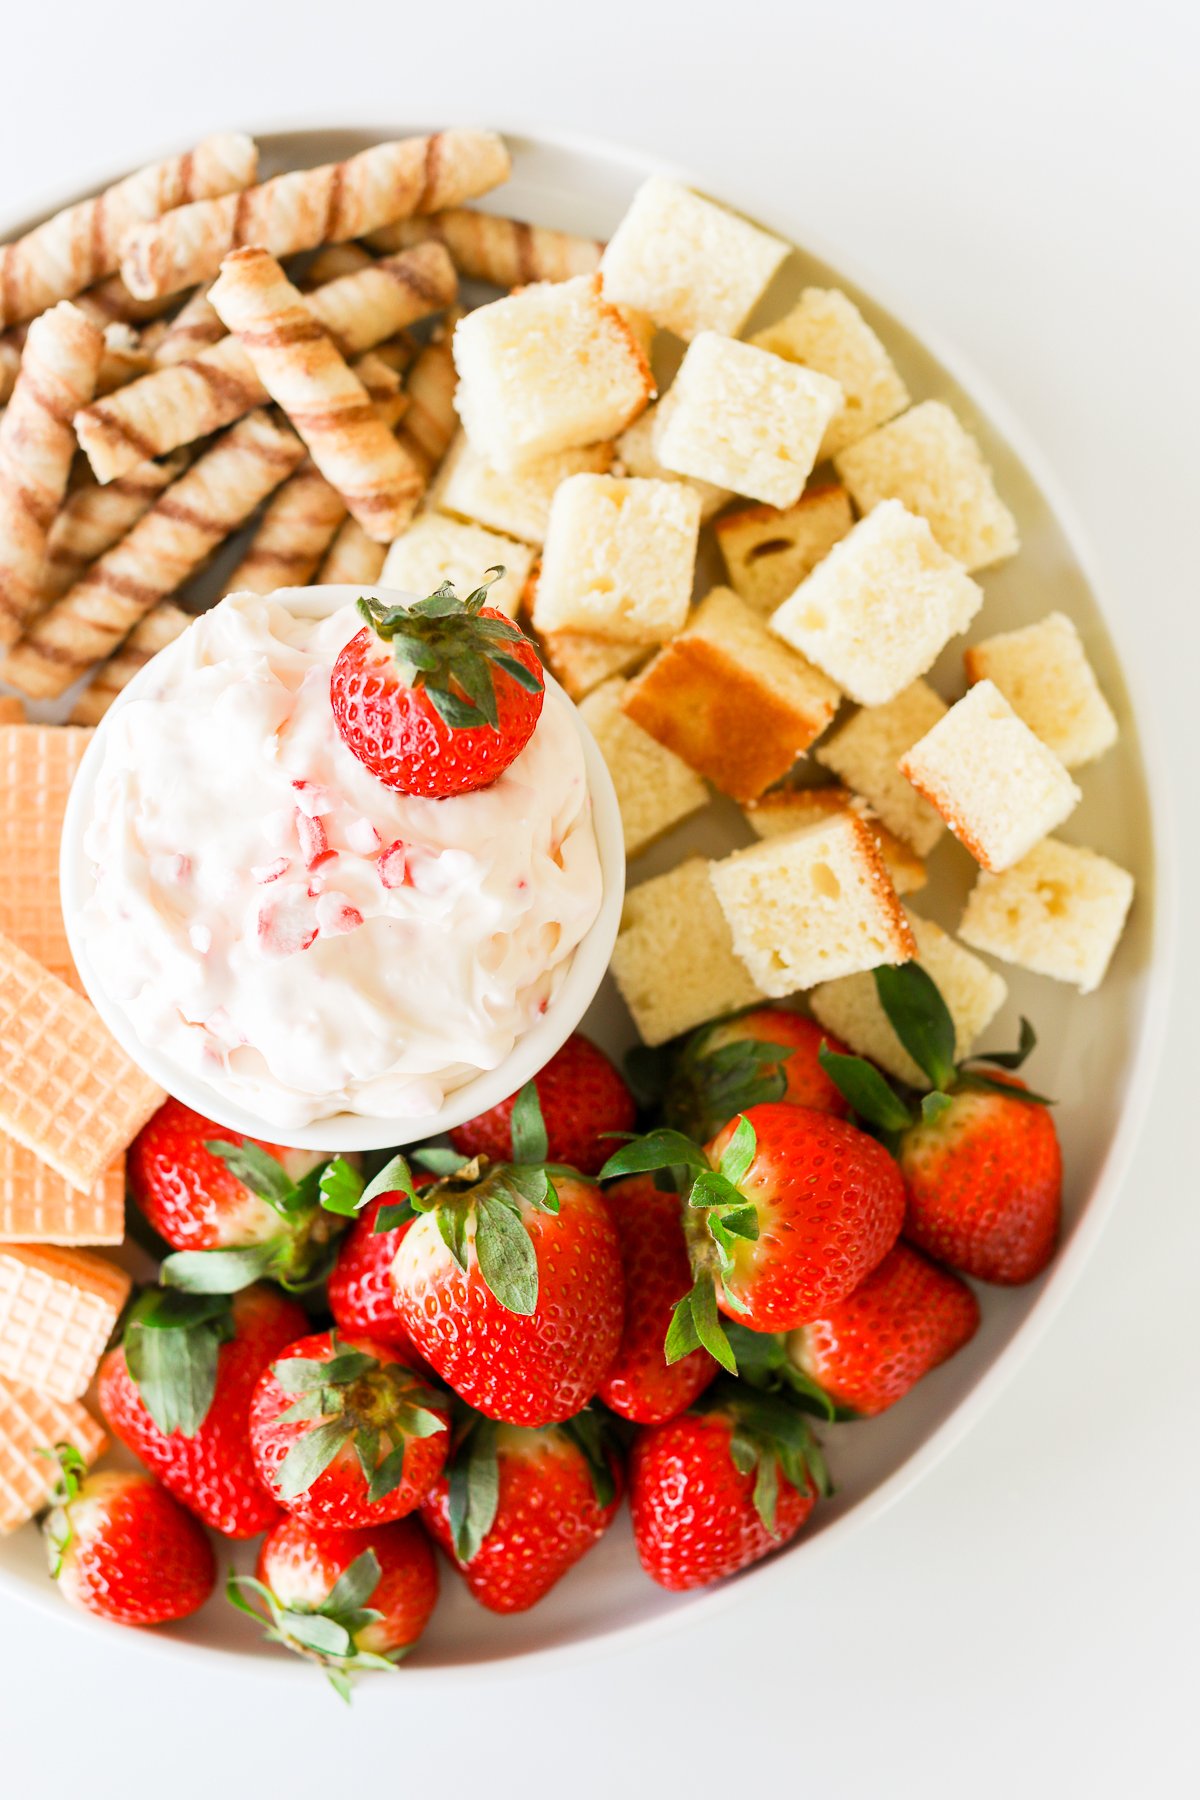 A plate with strawberries, crackers, and a sweet fruit dip.